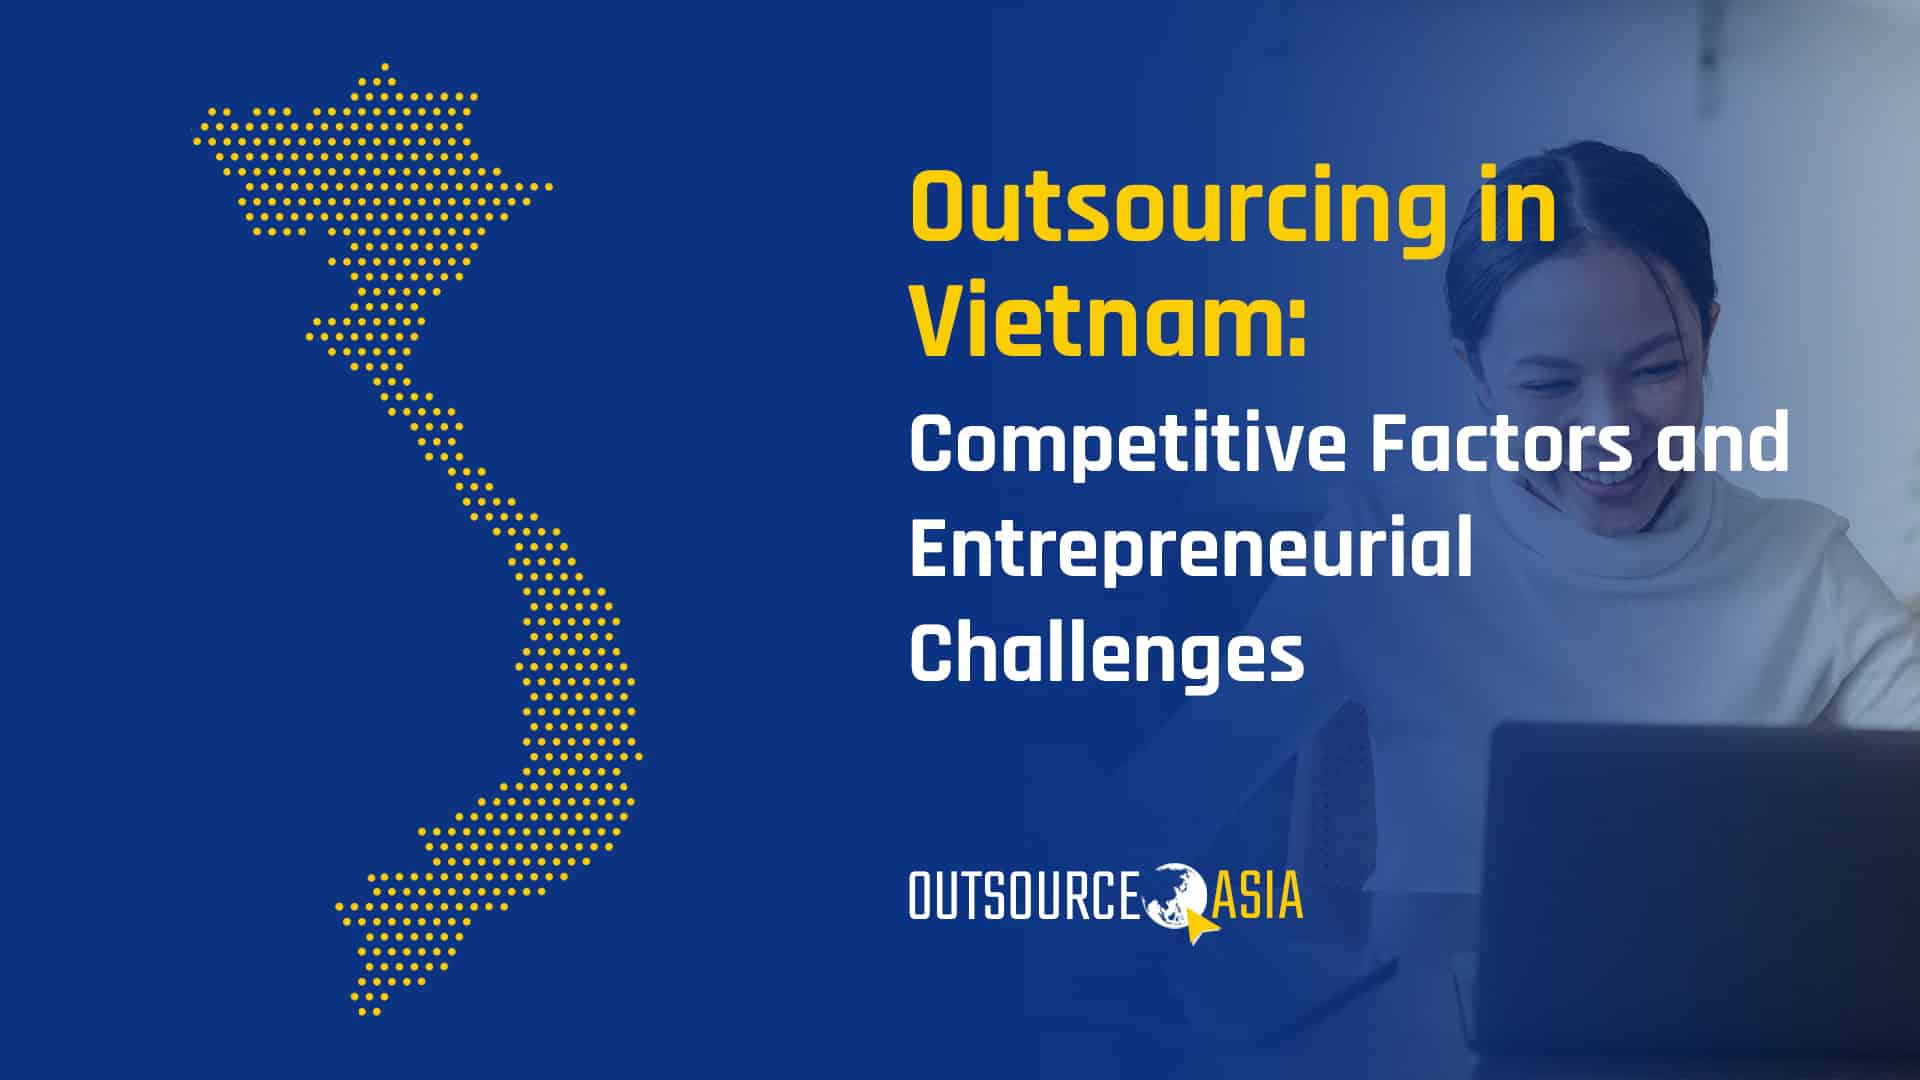 Outsourcing in Vietnam